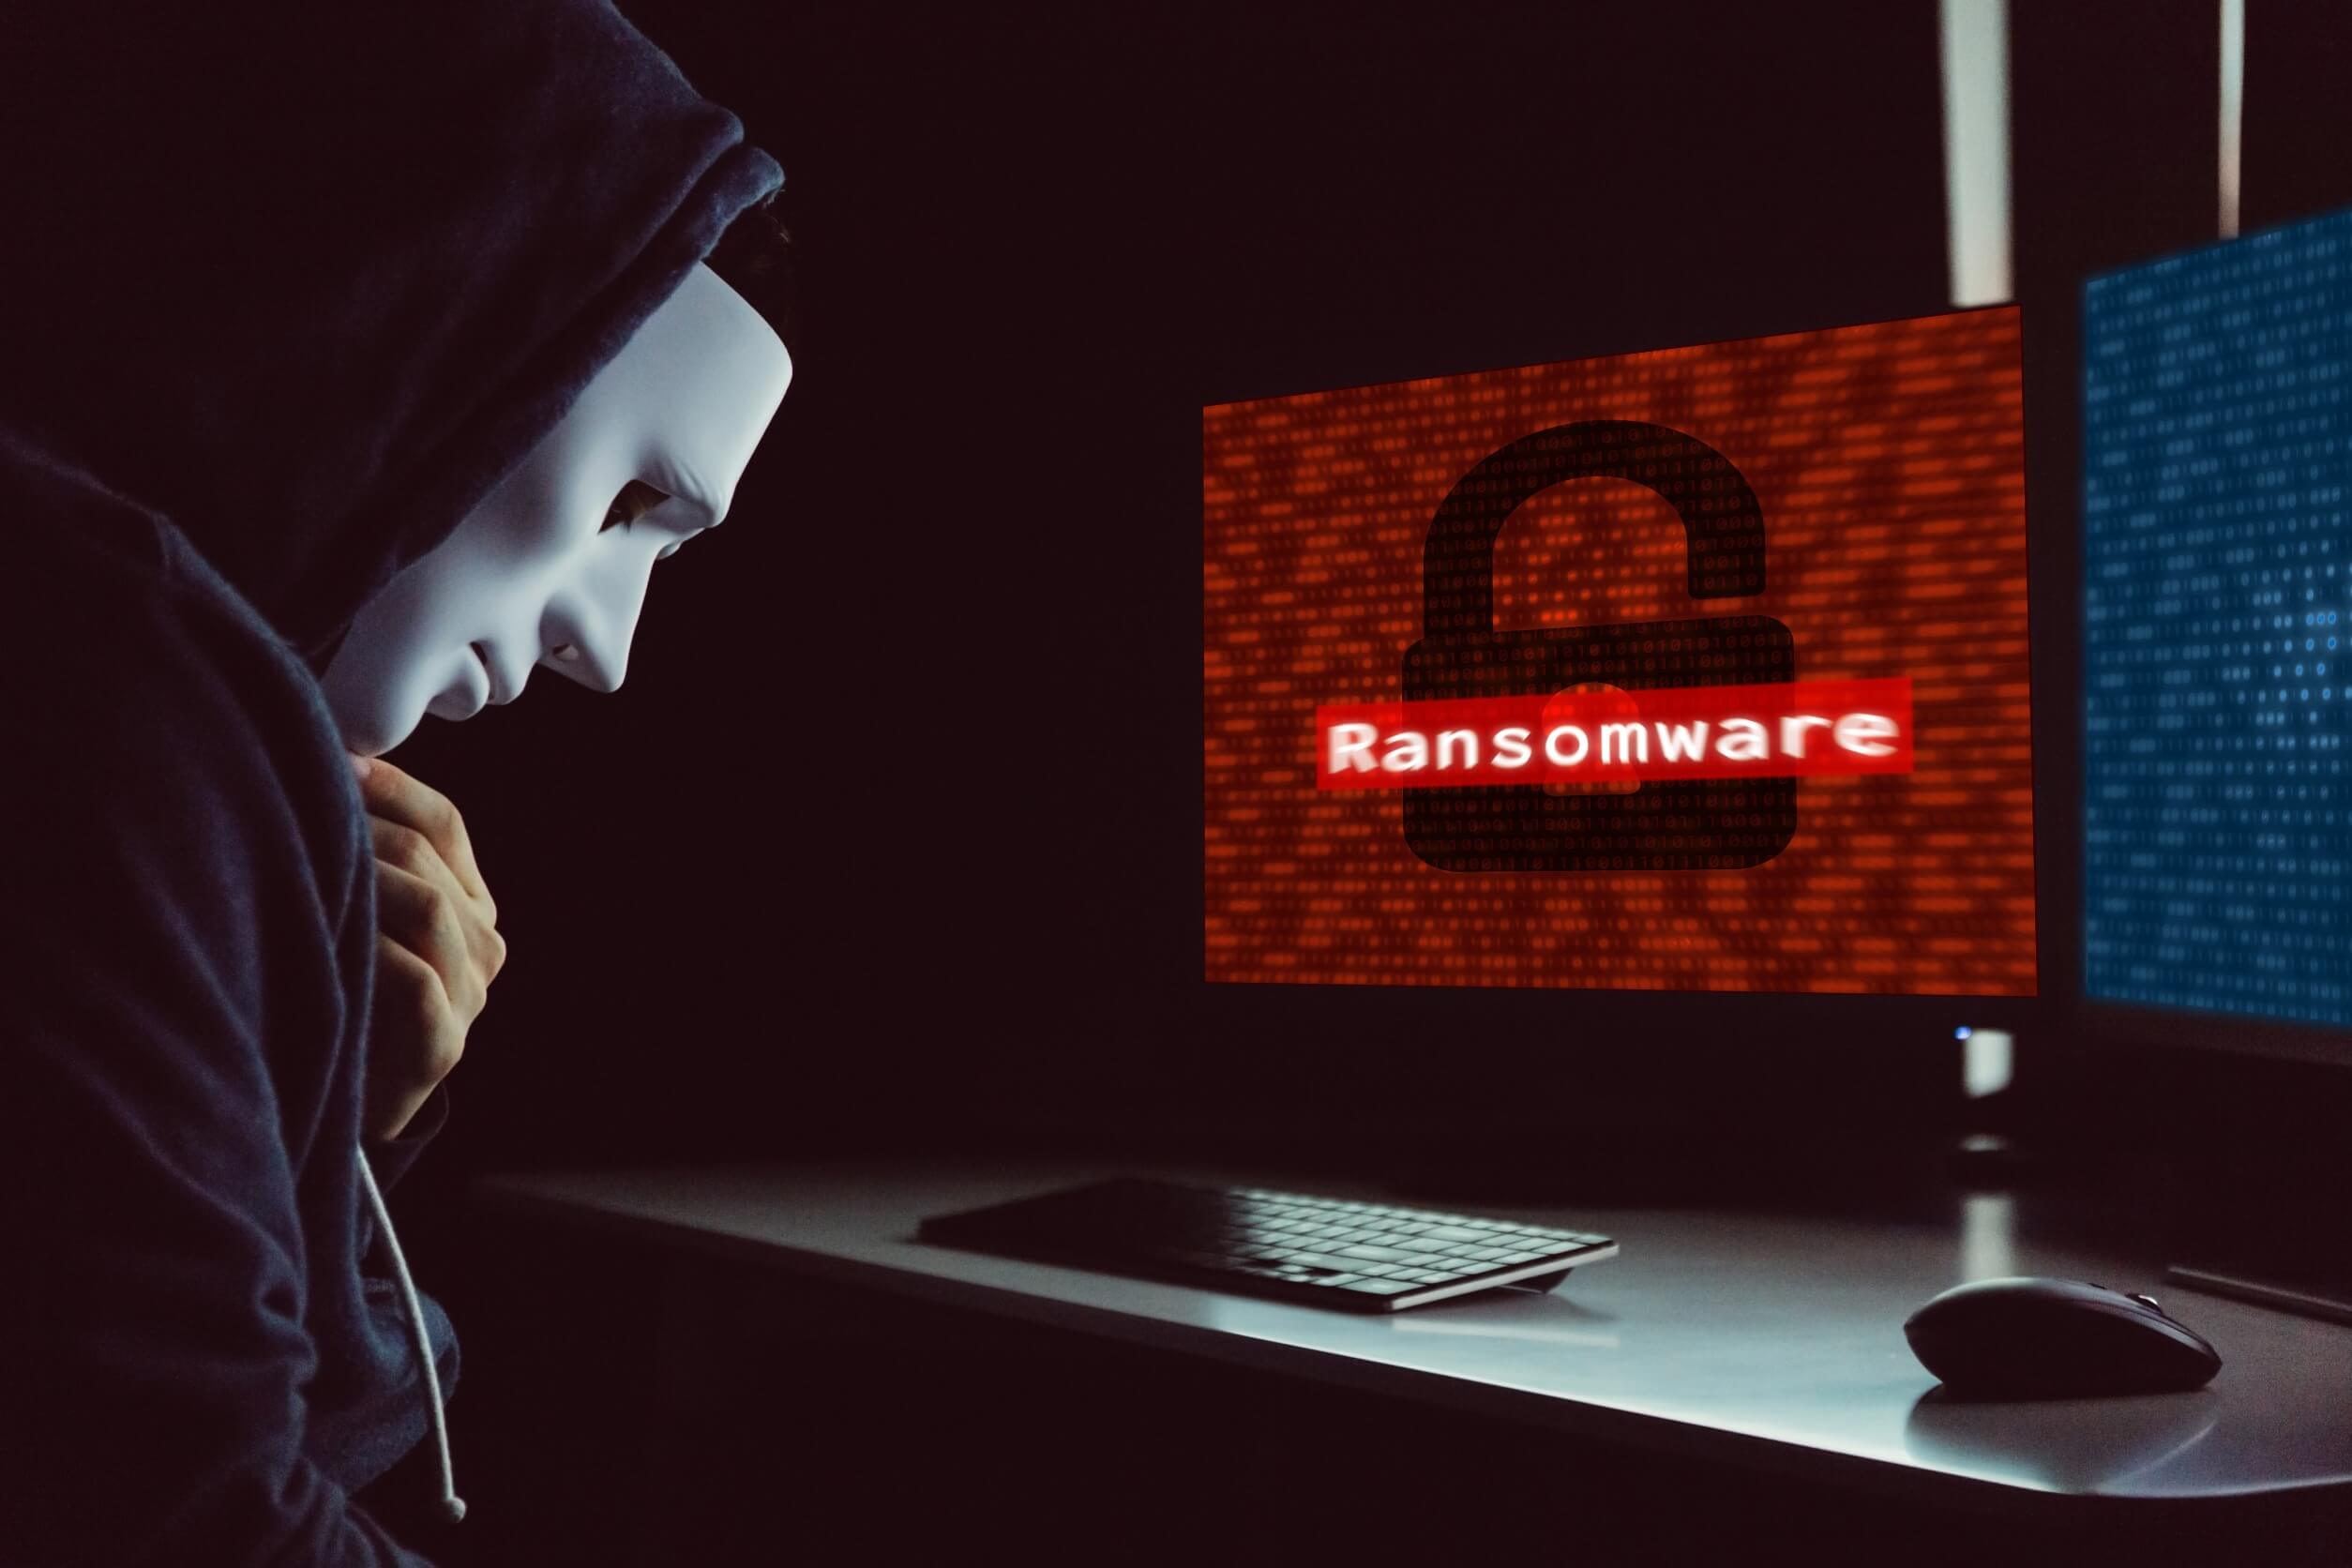 MediaMarkt hit by Hive ransomware, ransom now at 50 million